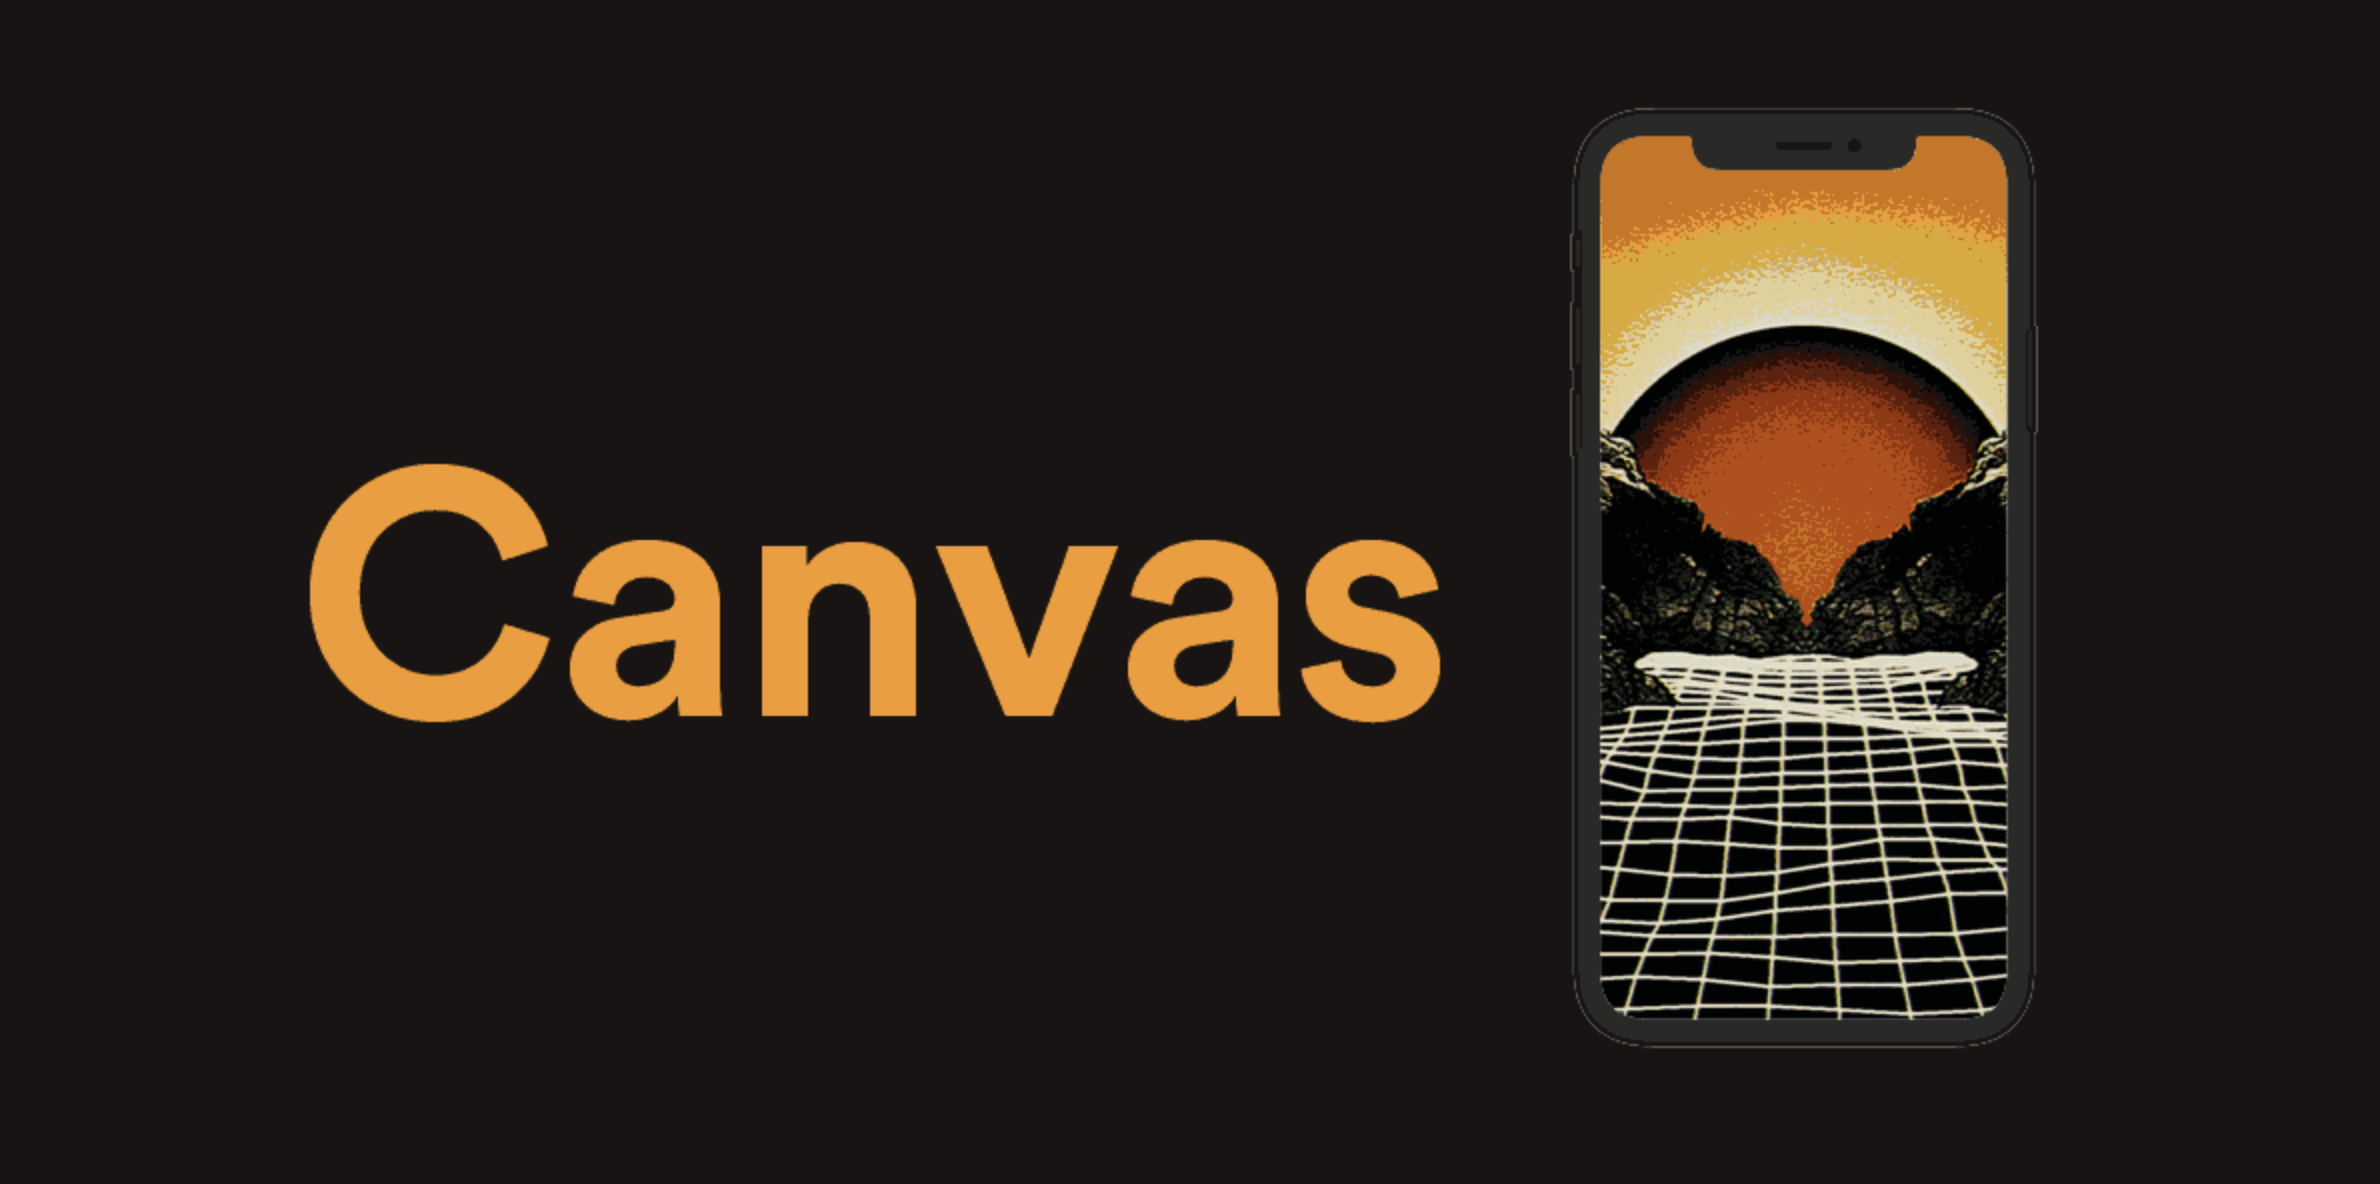 How To Make The Most Of Spotify s Canvas Tool Haulix Daily